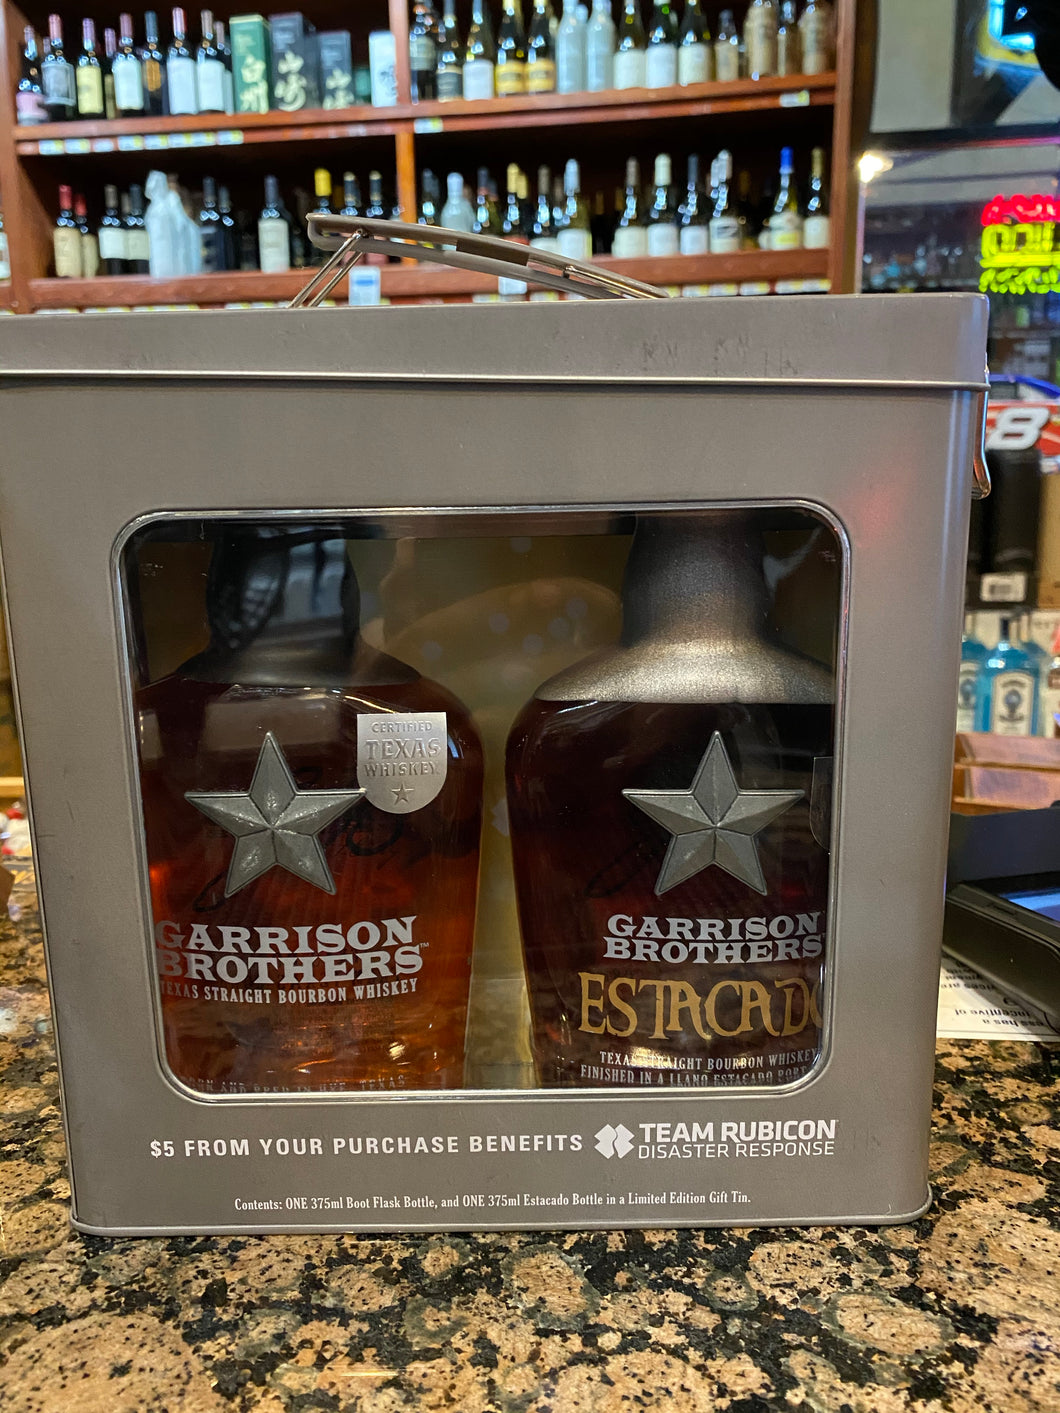 GARRISON BROTHERS Estacado and Straight Bourbon Whisky